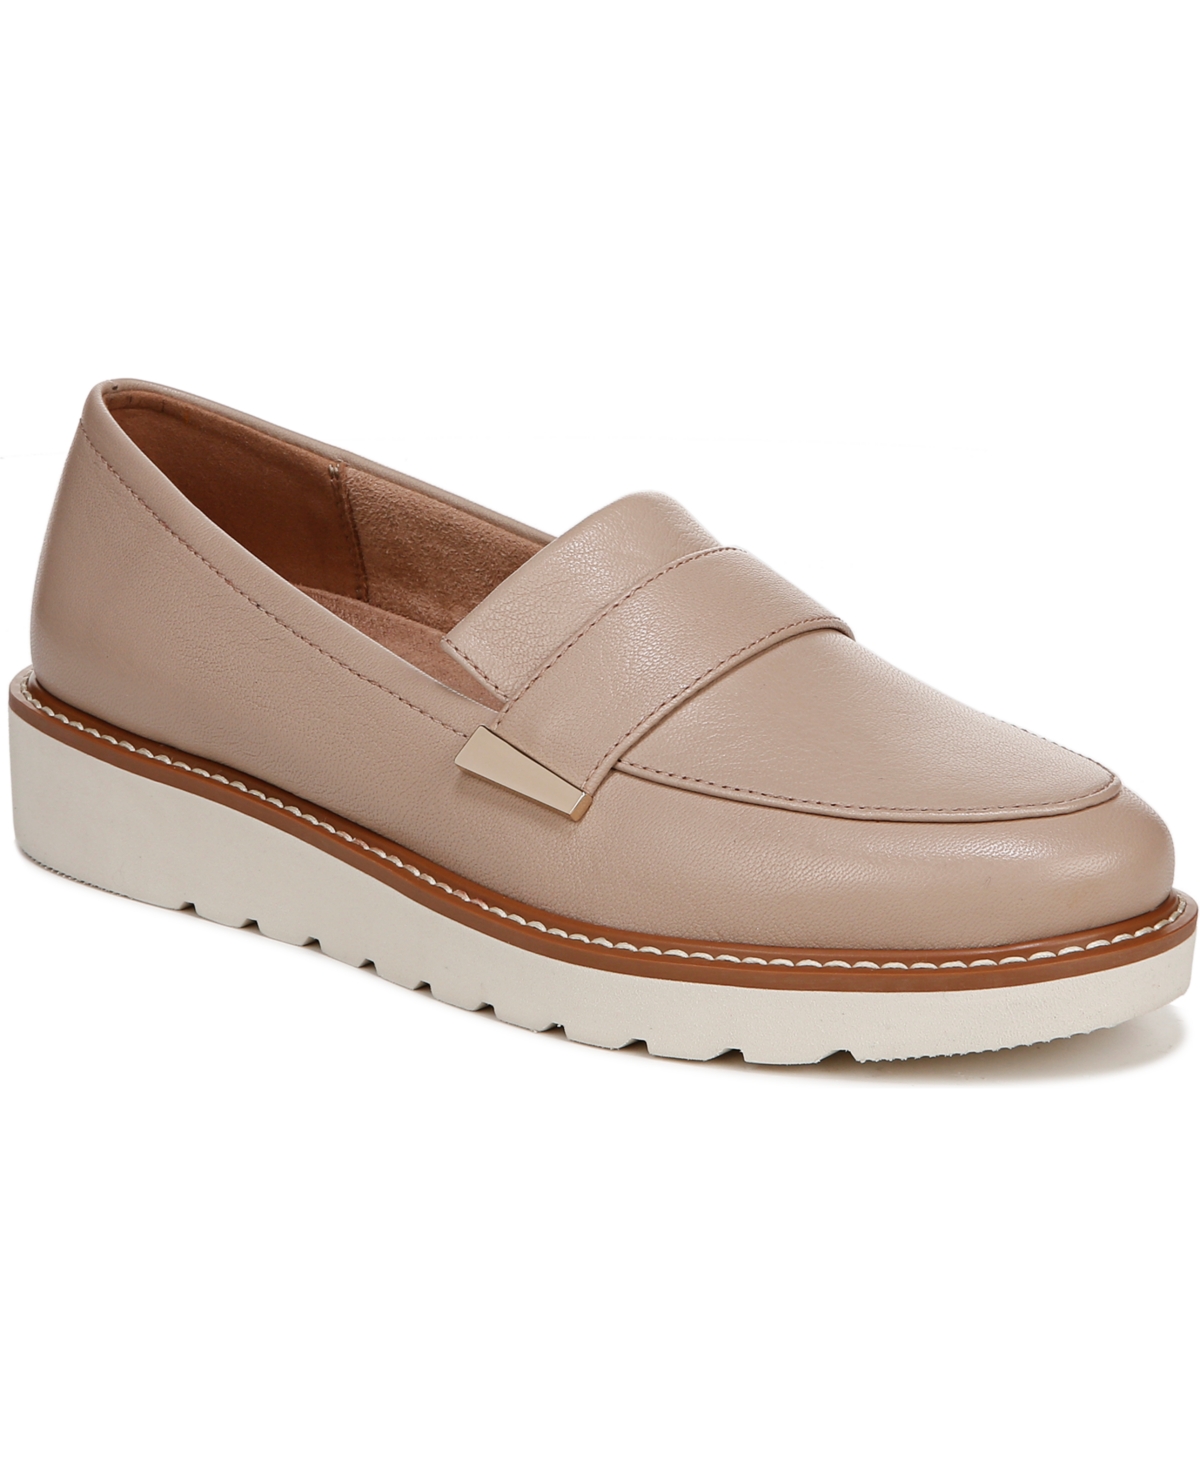 Naturalizer Adiline Lug Sole Loafers In Warm Tan Leather